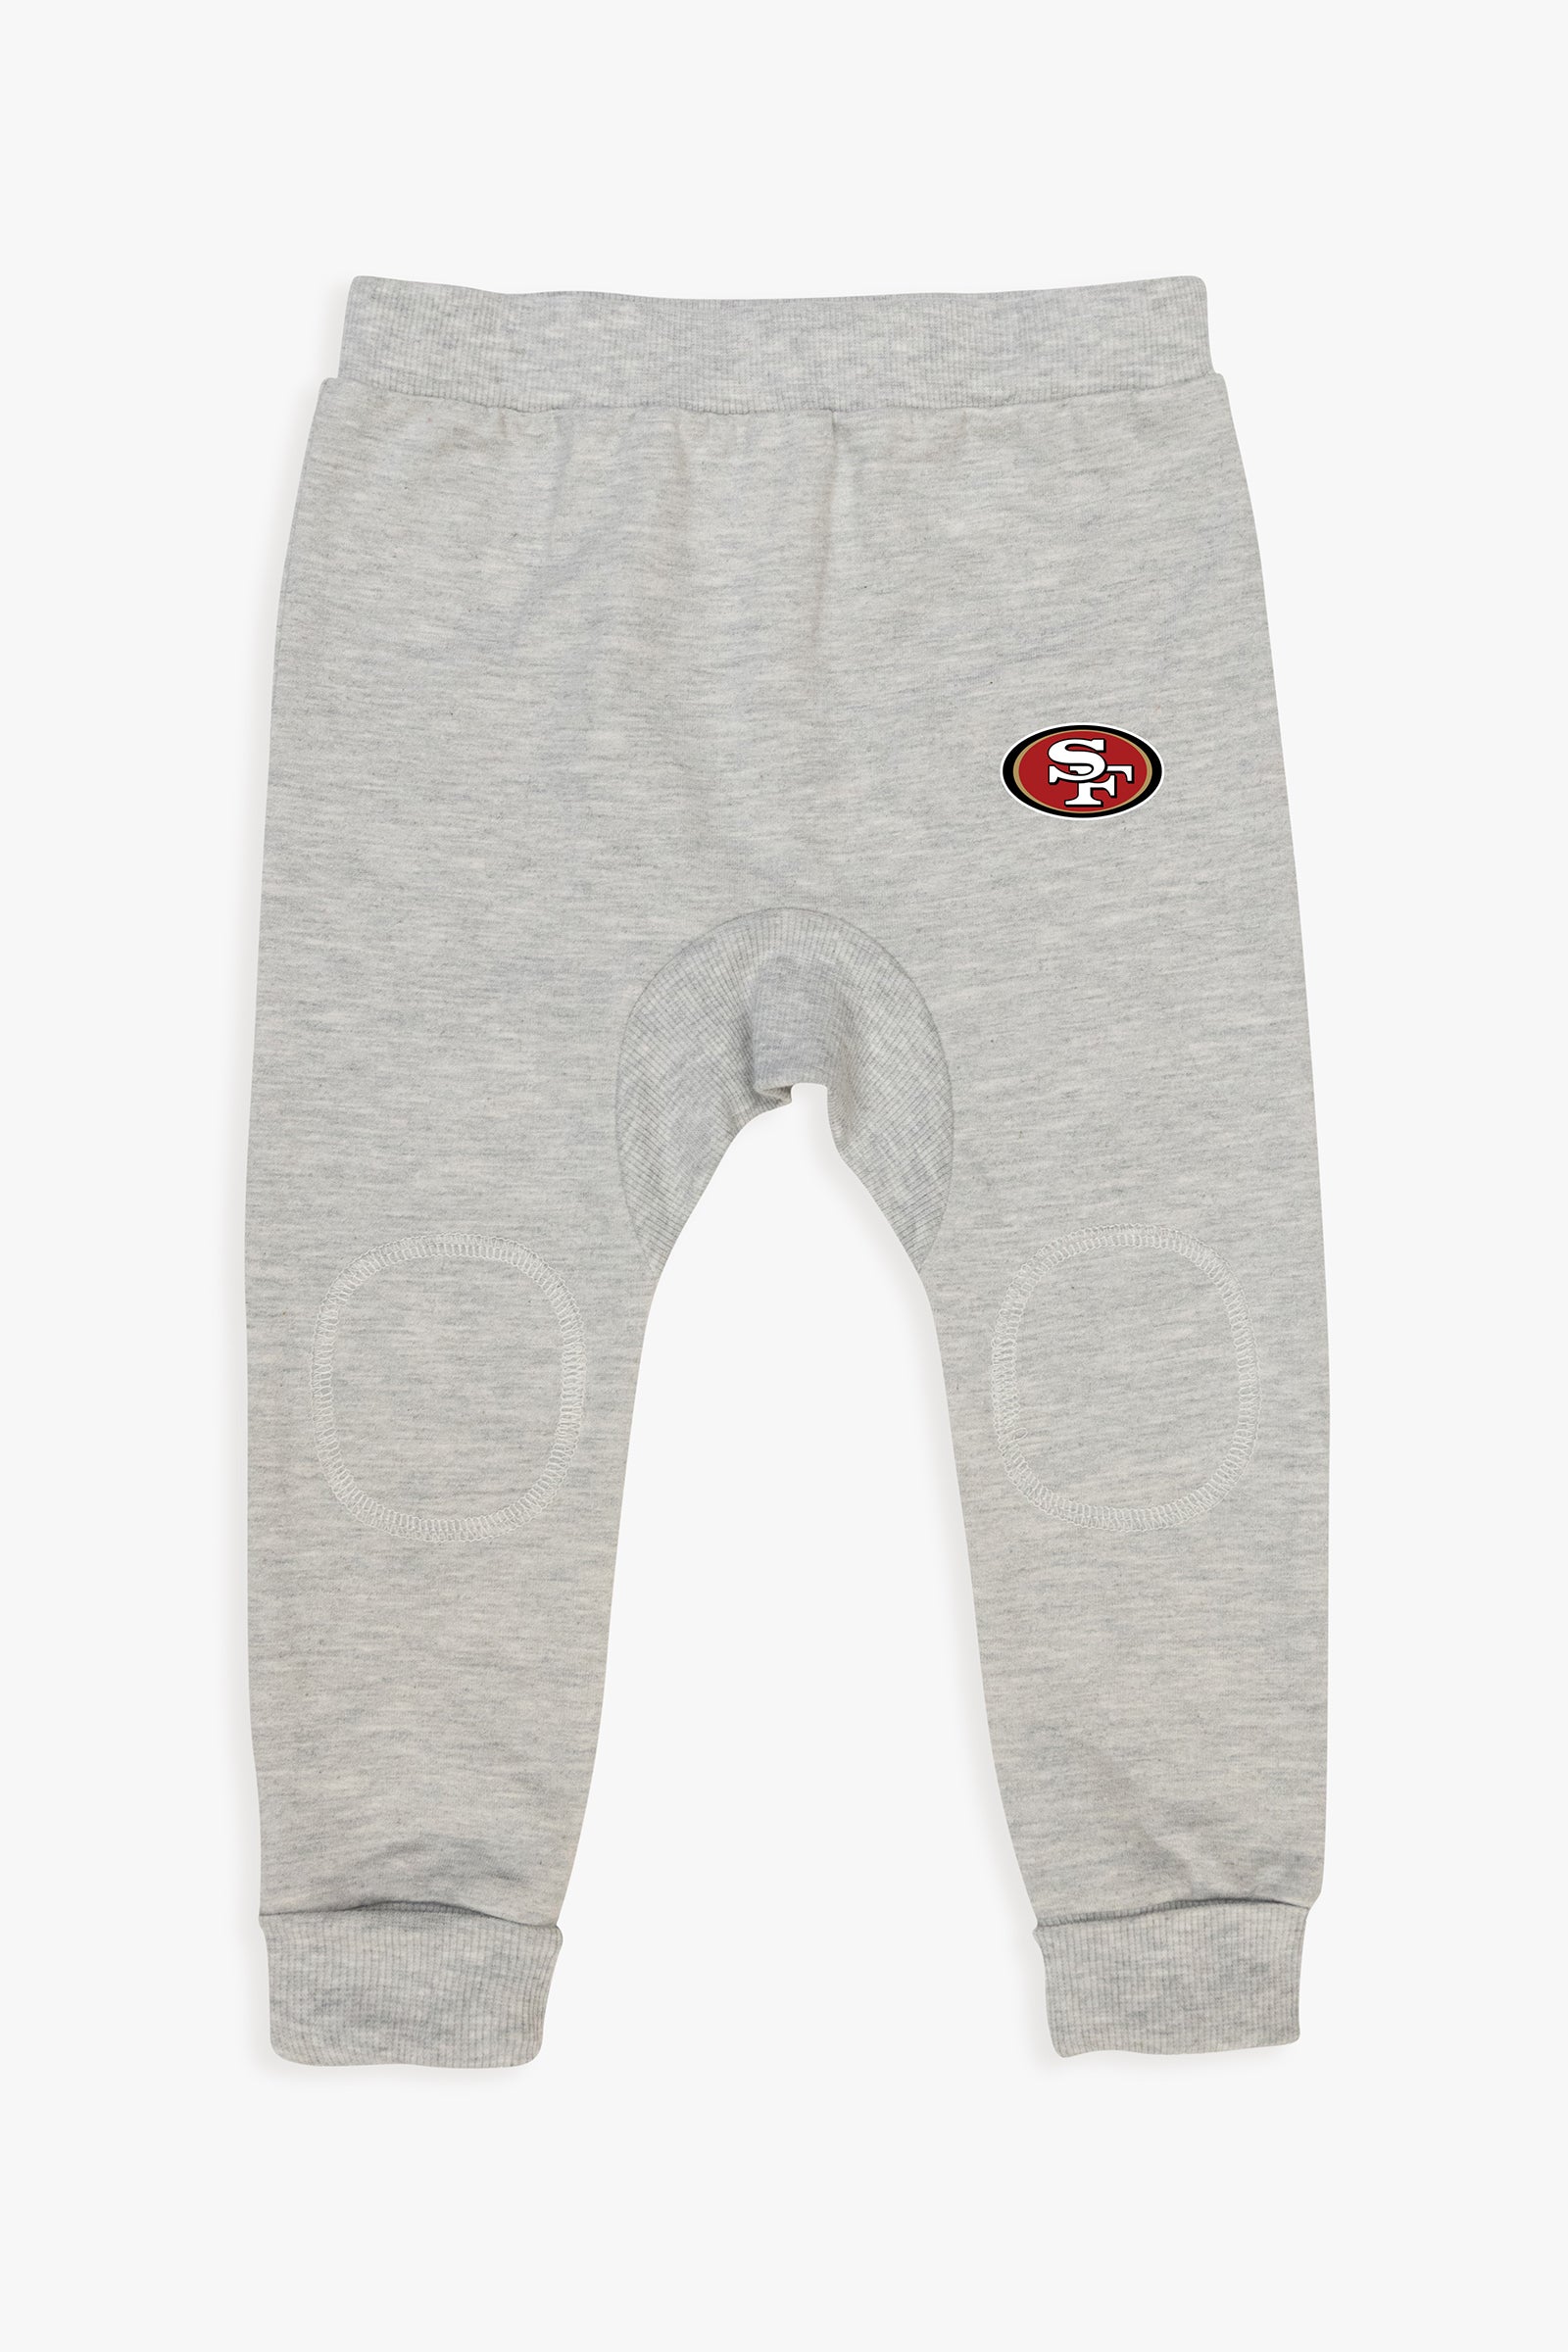 NFL Baby Grey French Terry Pants